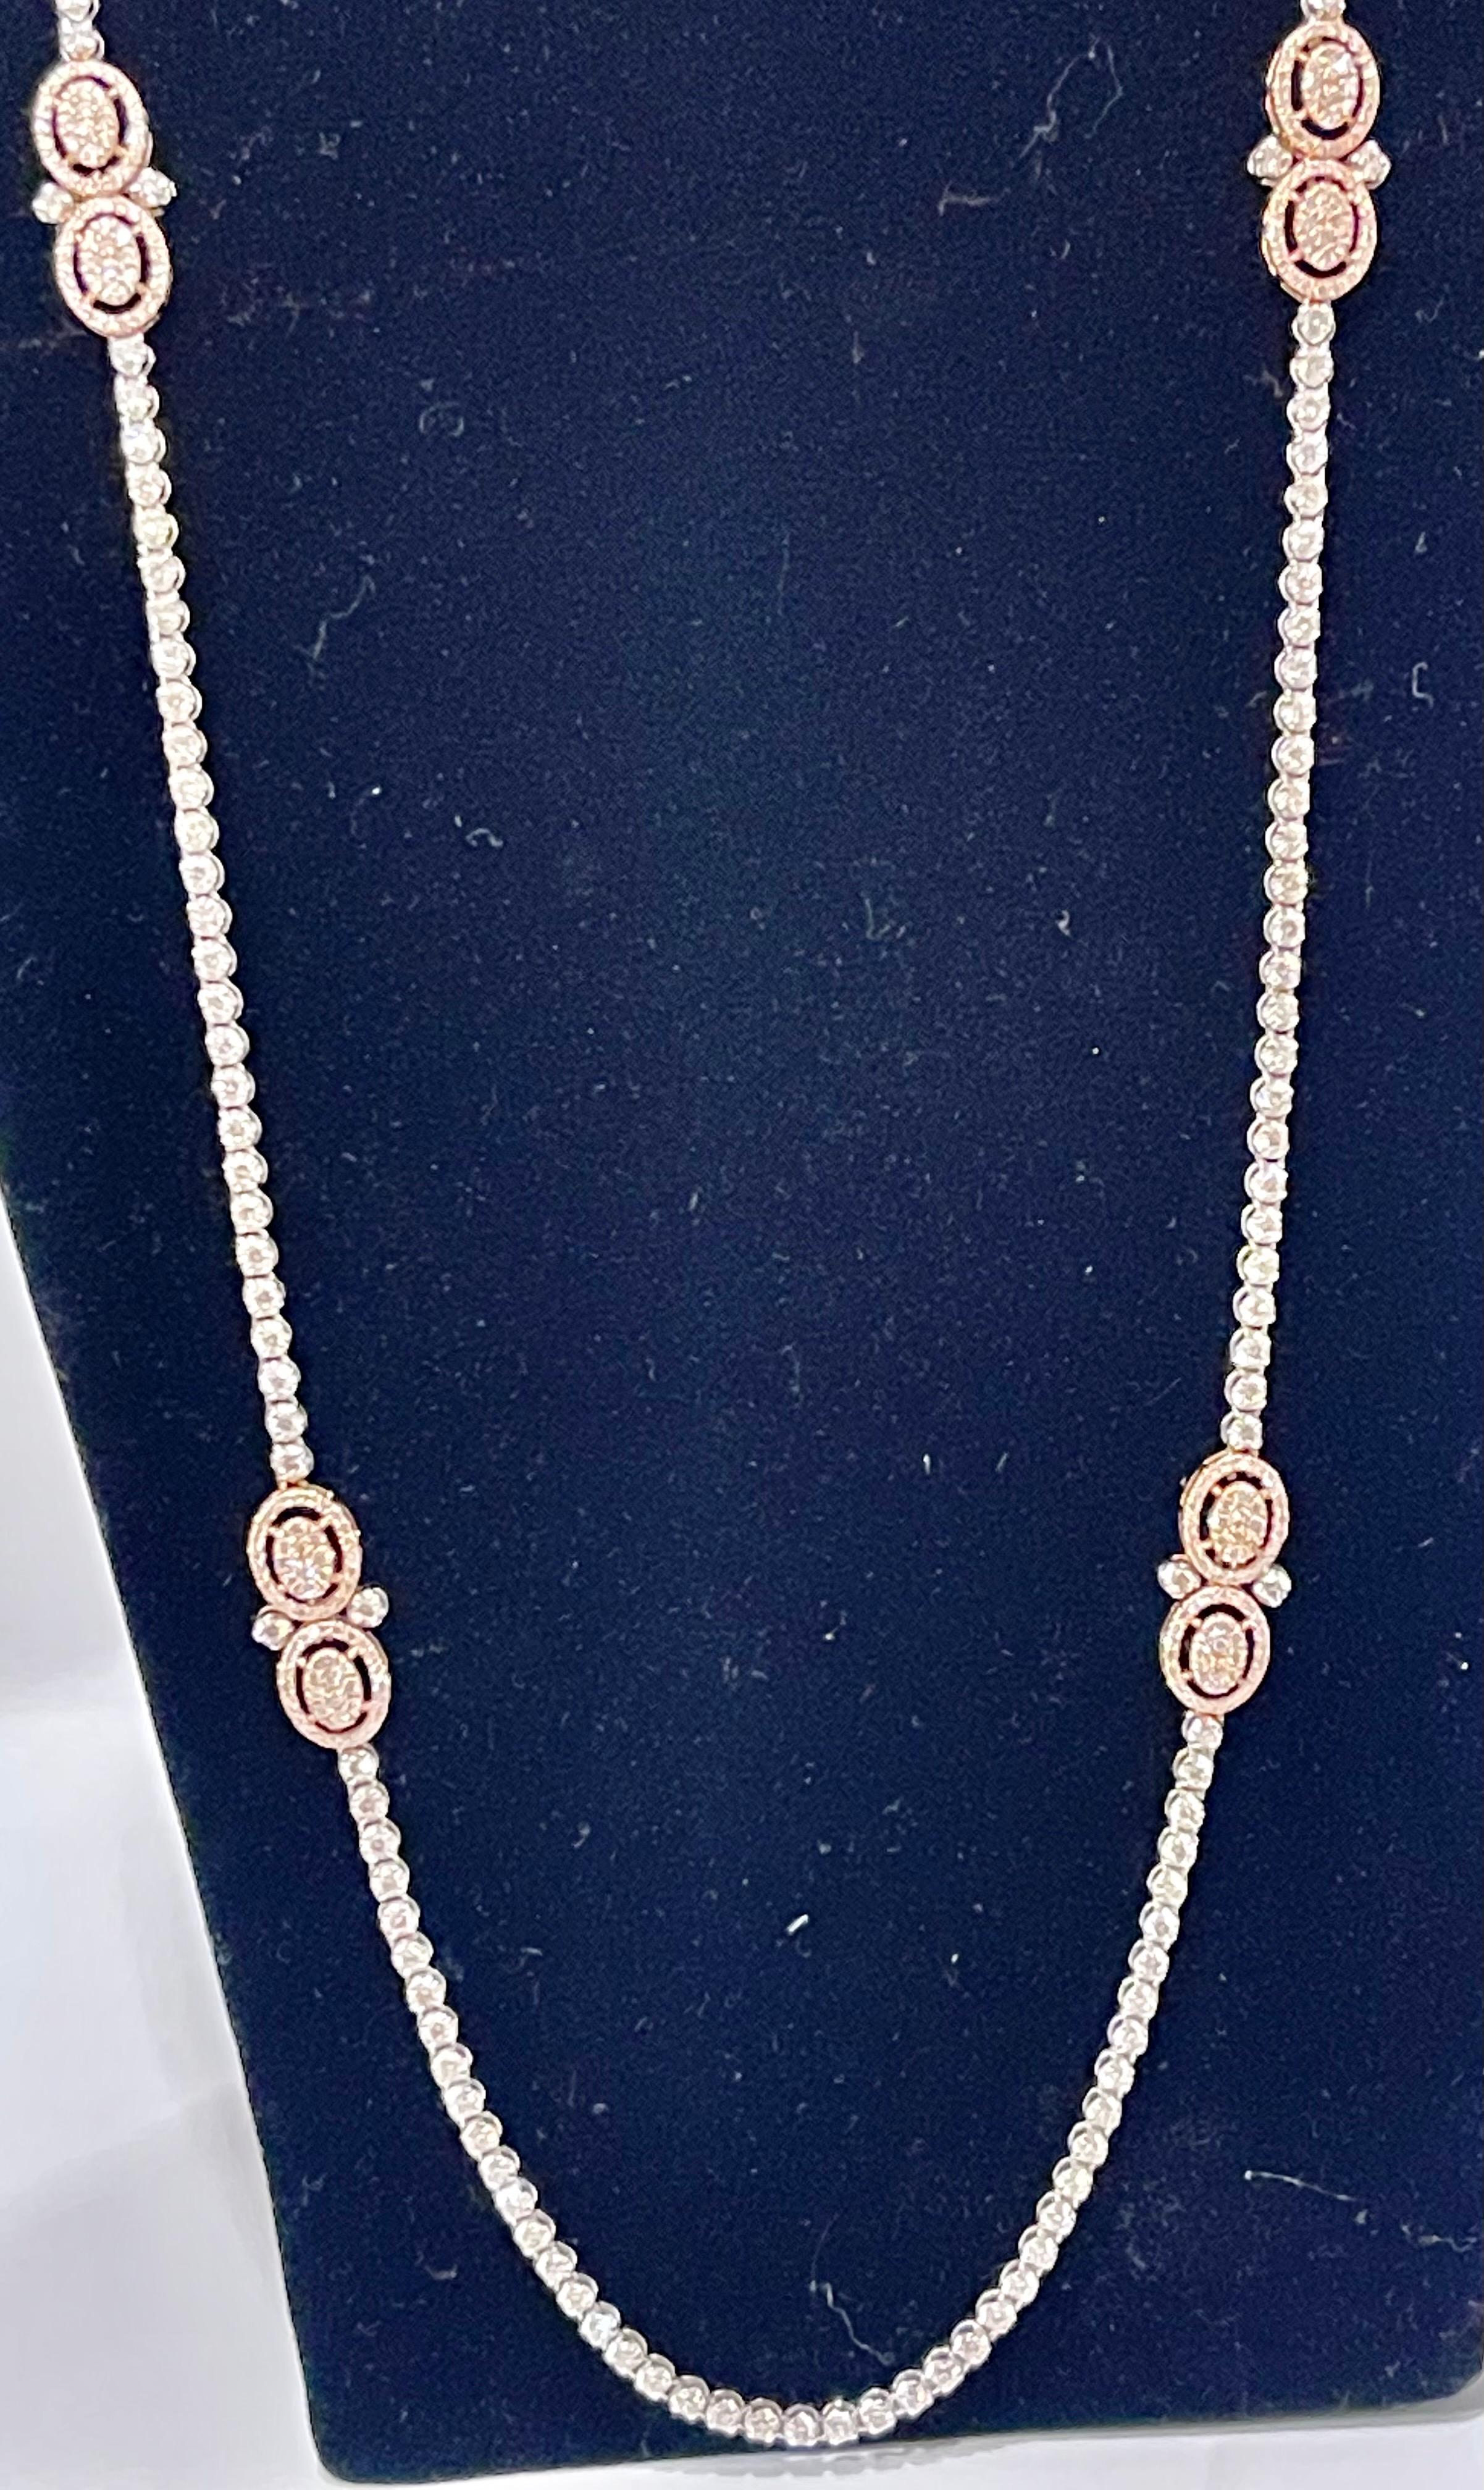 8 Ct Brilliant Cut Diamond Long Necklace in White & Pink 14 K Gold 27 Gm 5